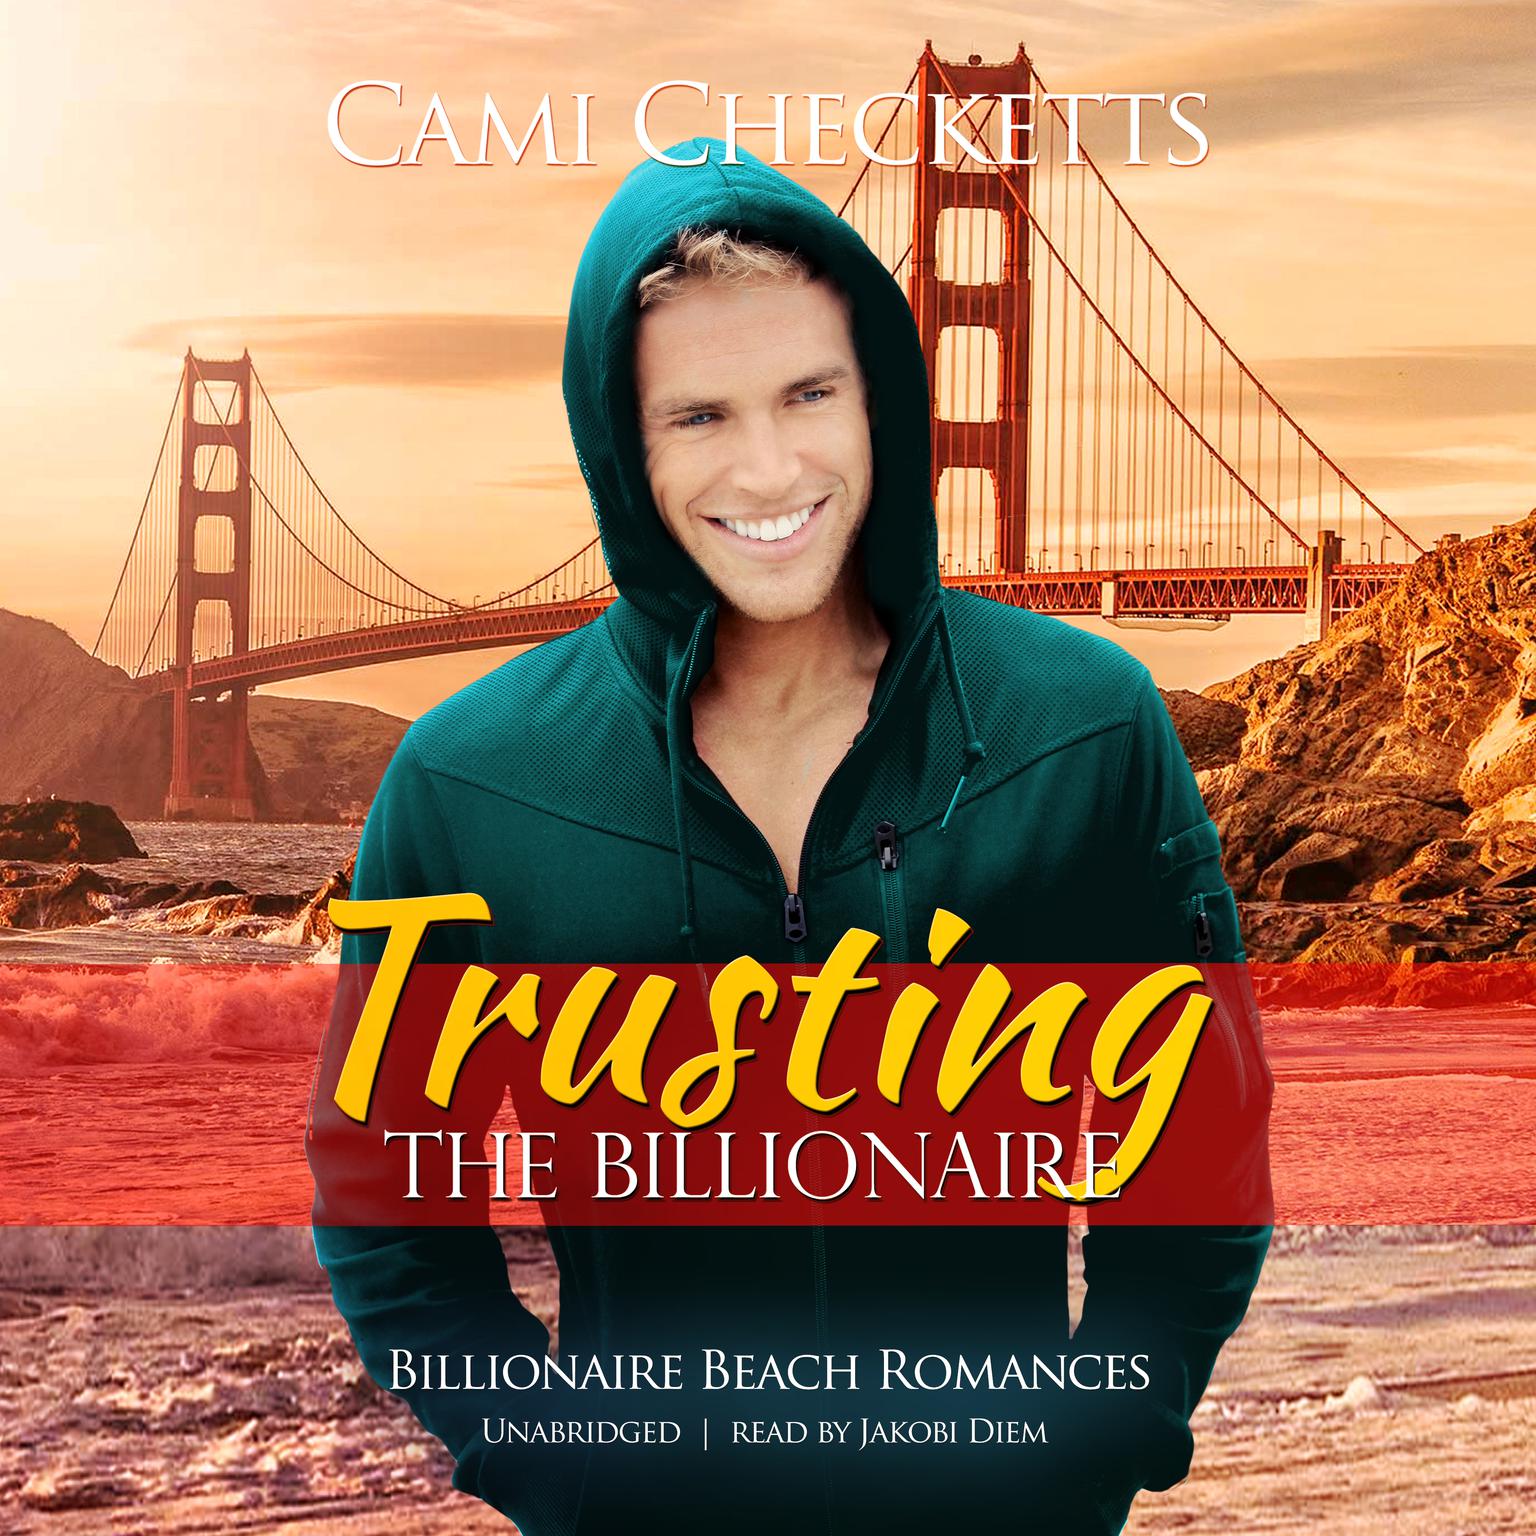 Trusting the Billionaire Audiobook, by Cami Checketts